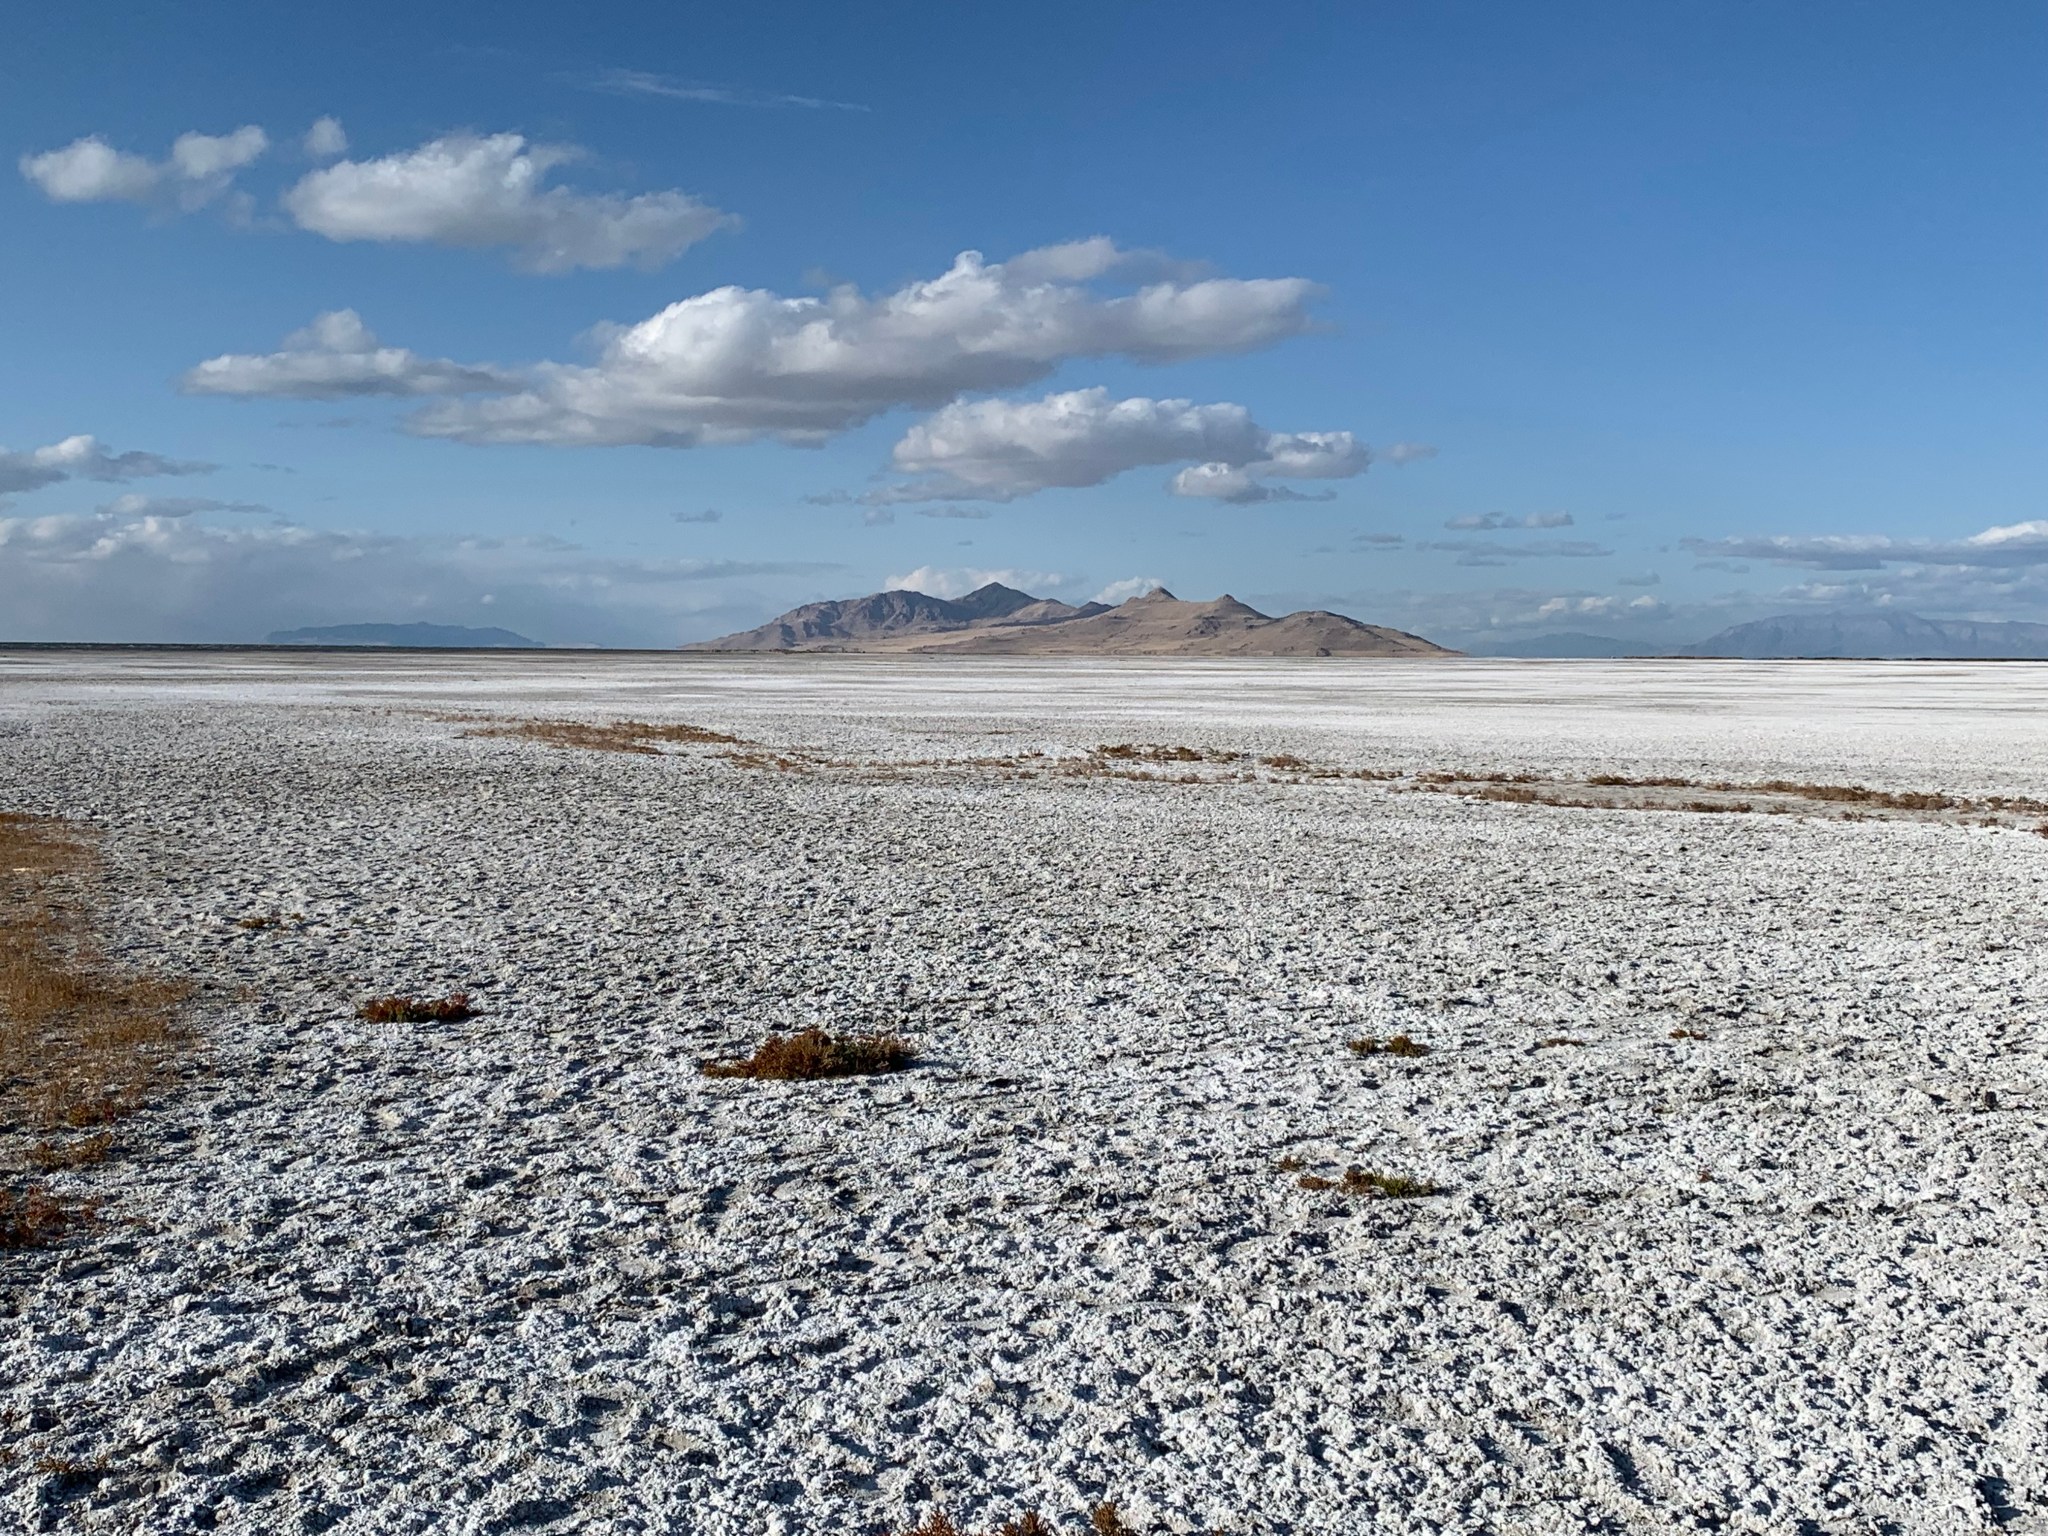 This is a photgraph of the dry lakebed of the Great Salt Lake extending into the distance where the is a large, far off mountain range.